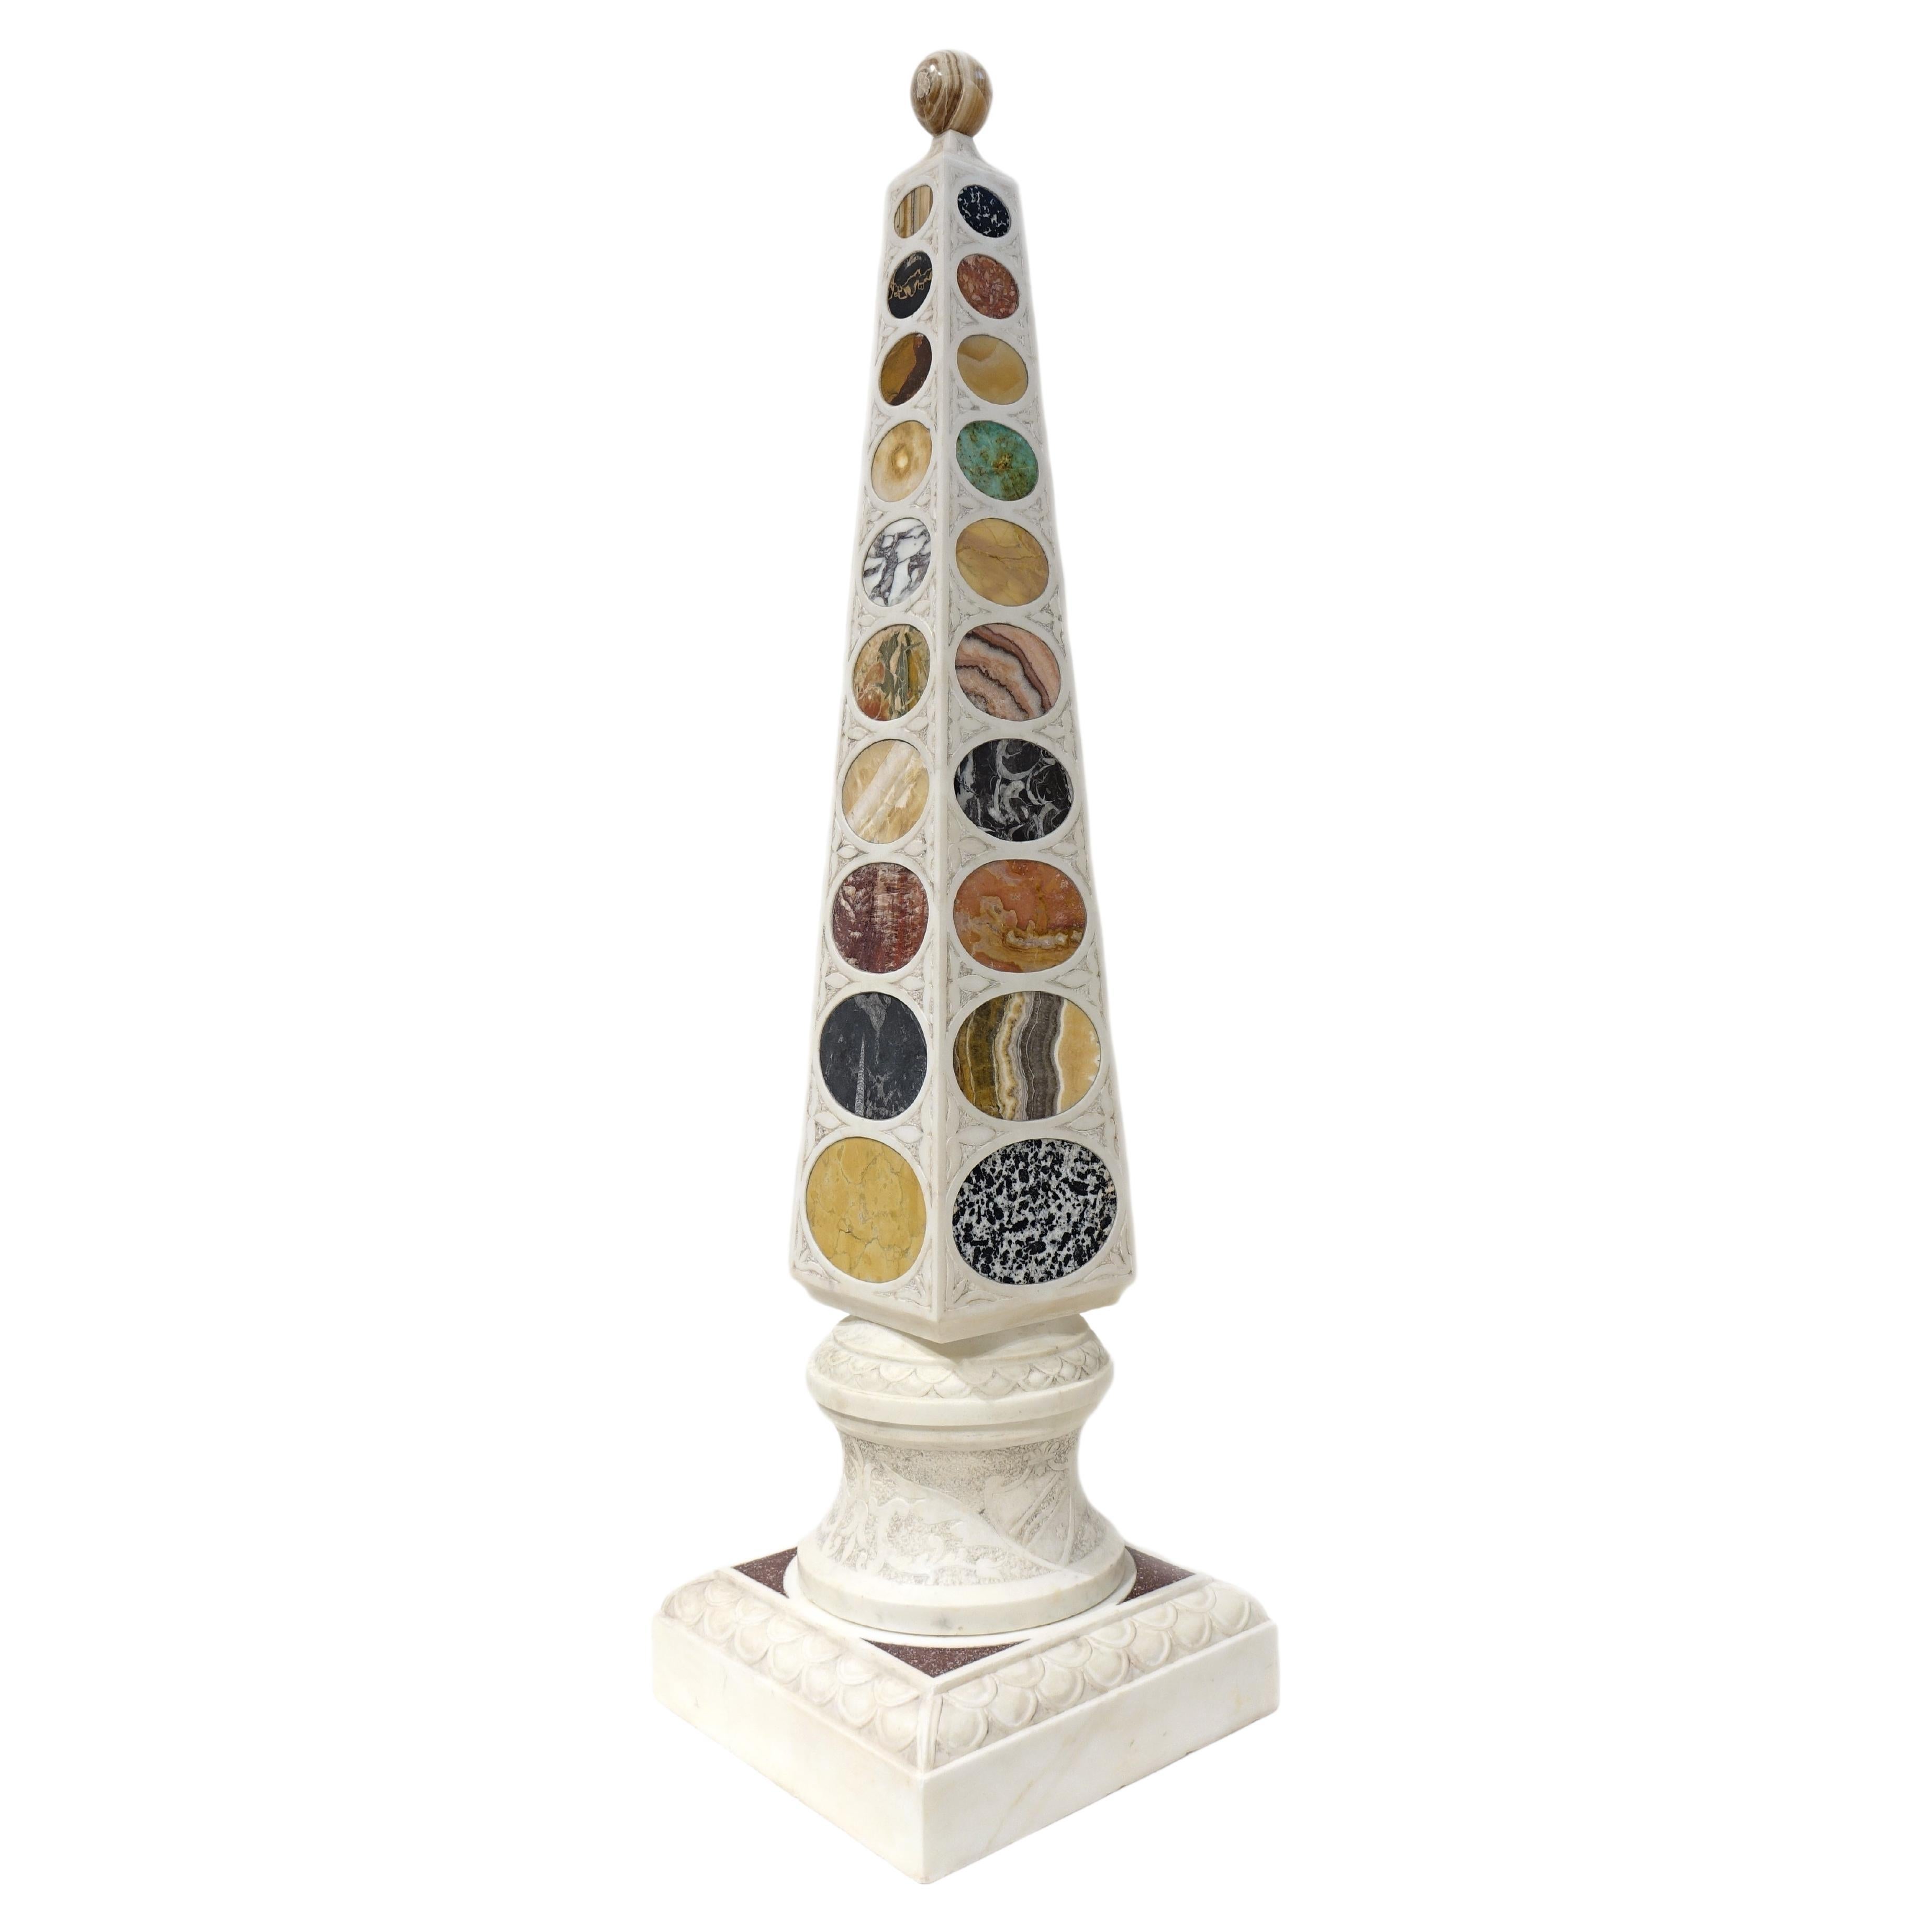 Pair of Obelisks in Carrara White Marble with Marble Sampling, Italy 20th Centur